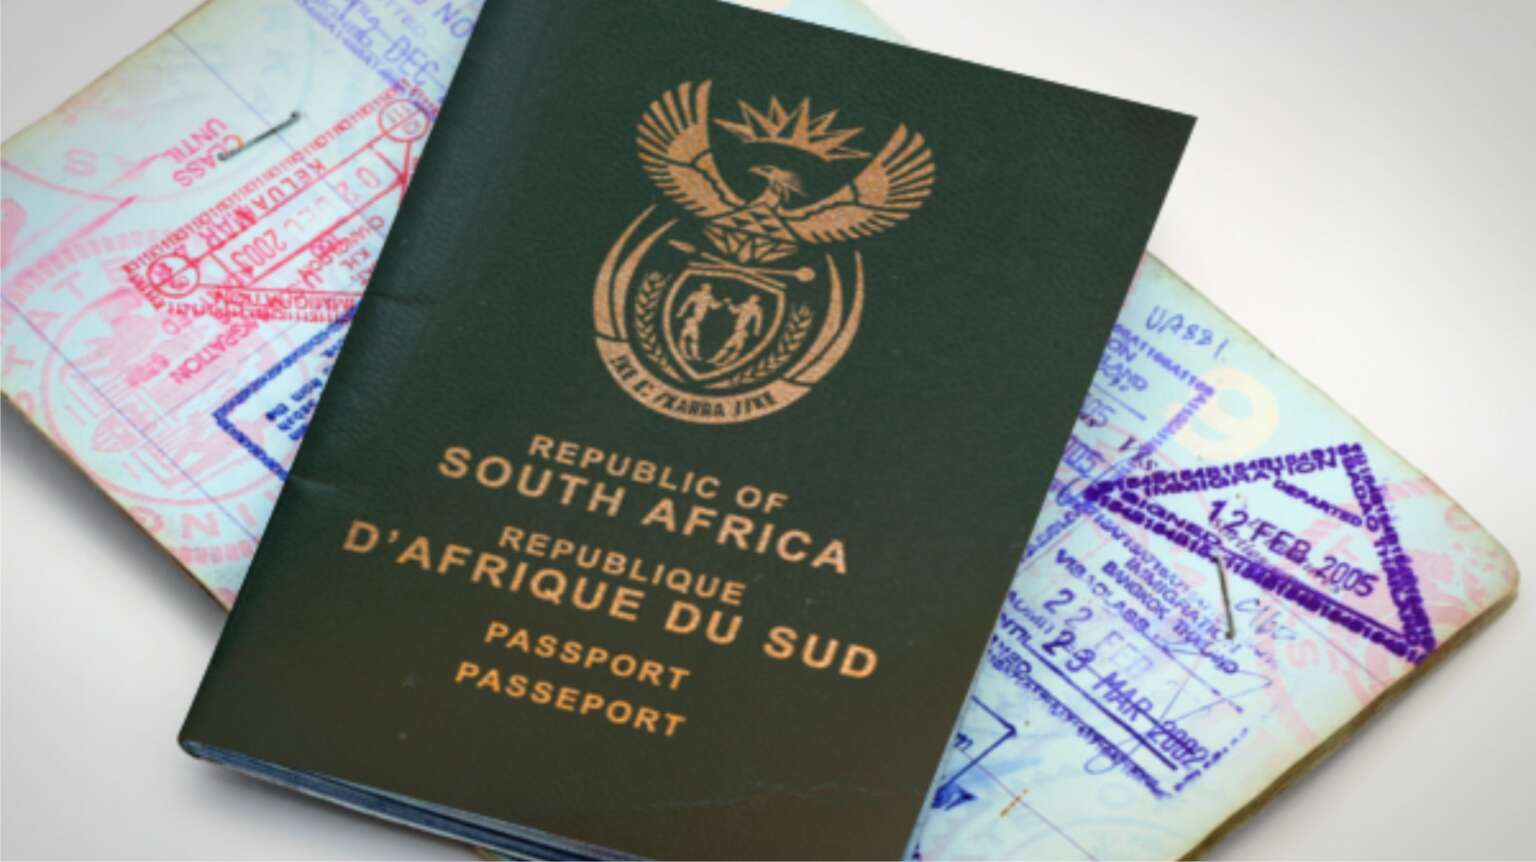 south africa travel document free visa countries